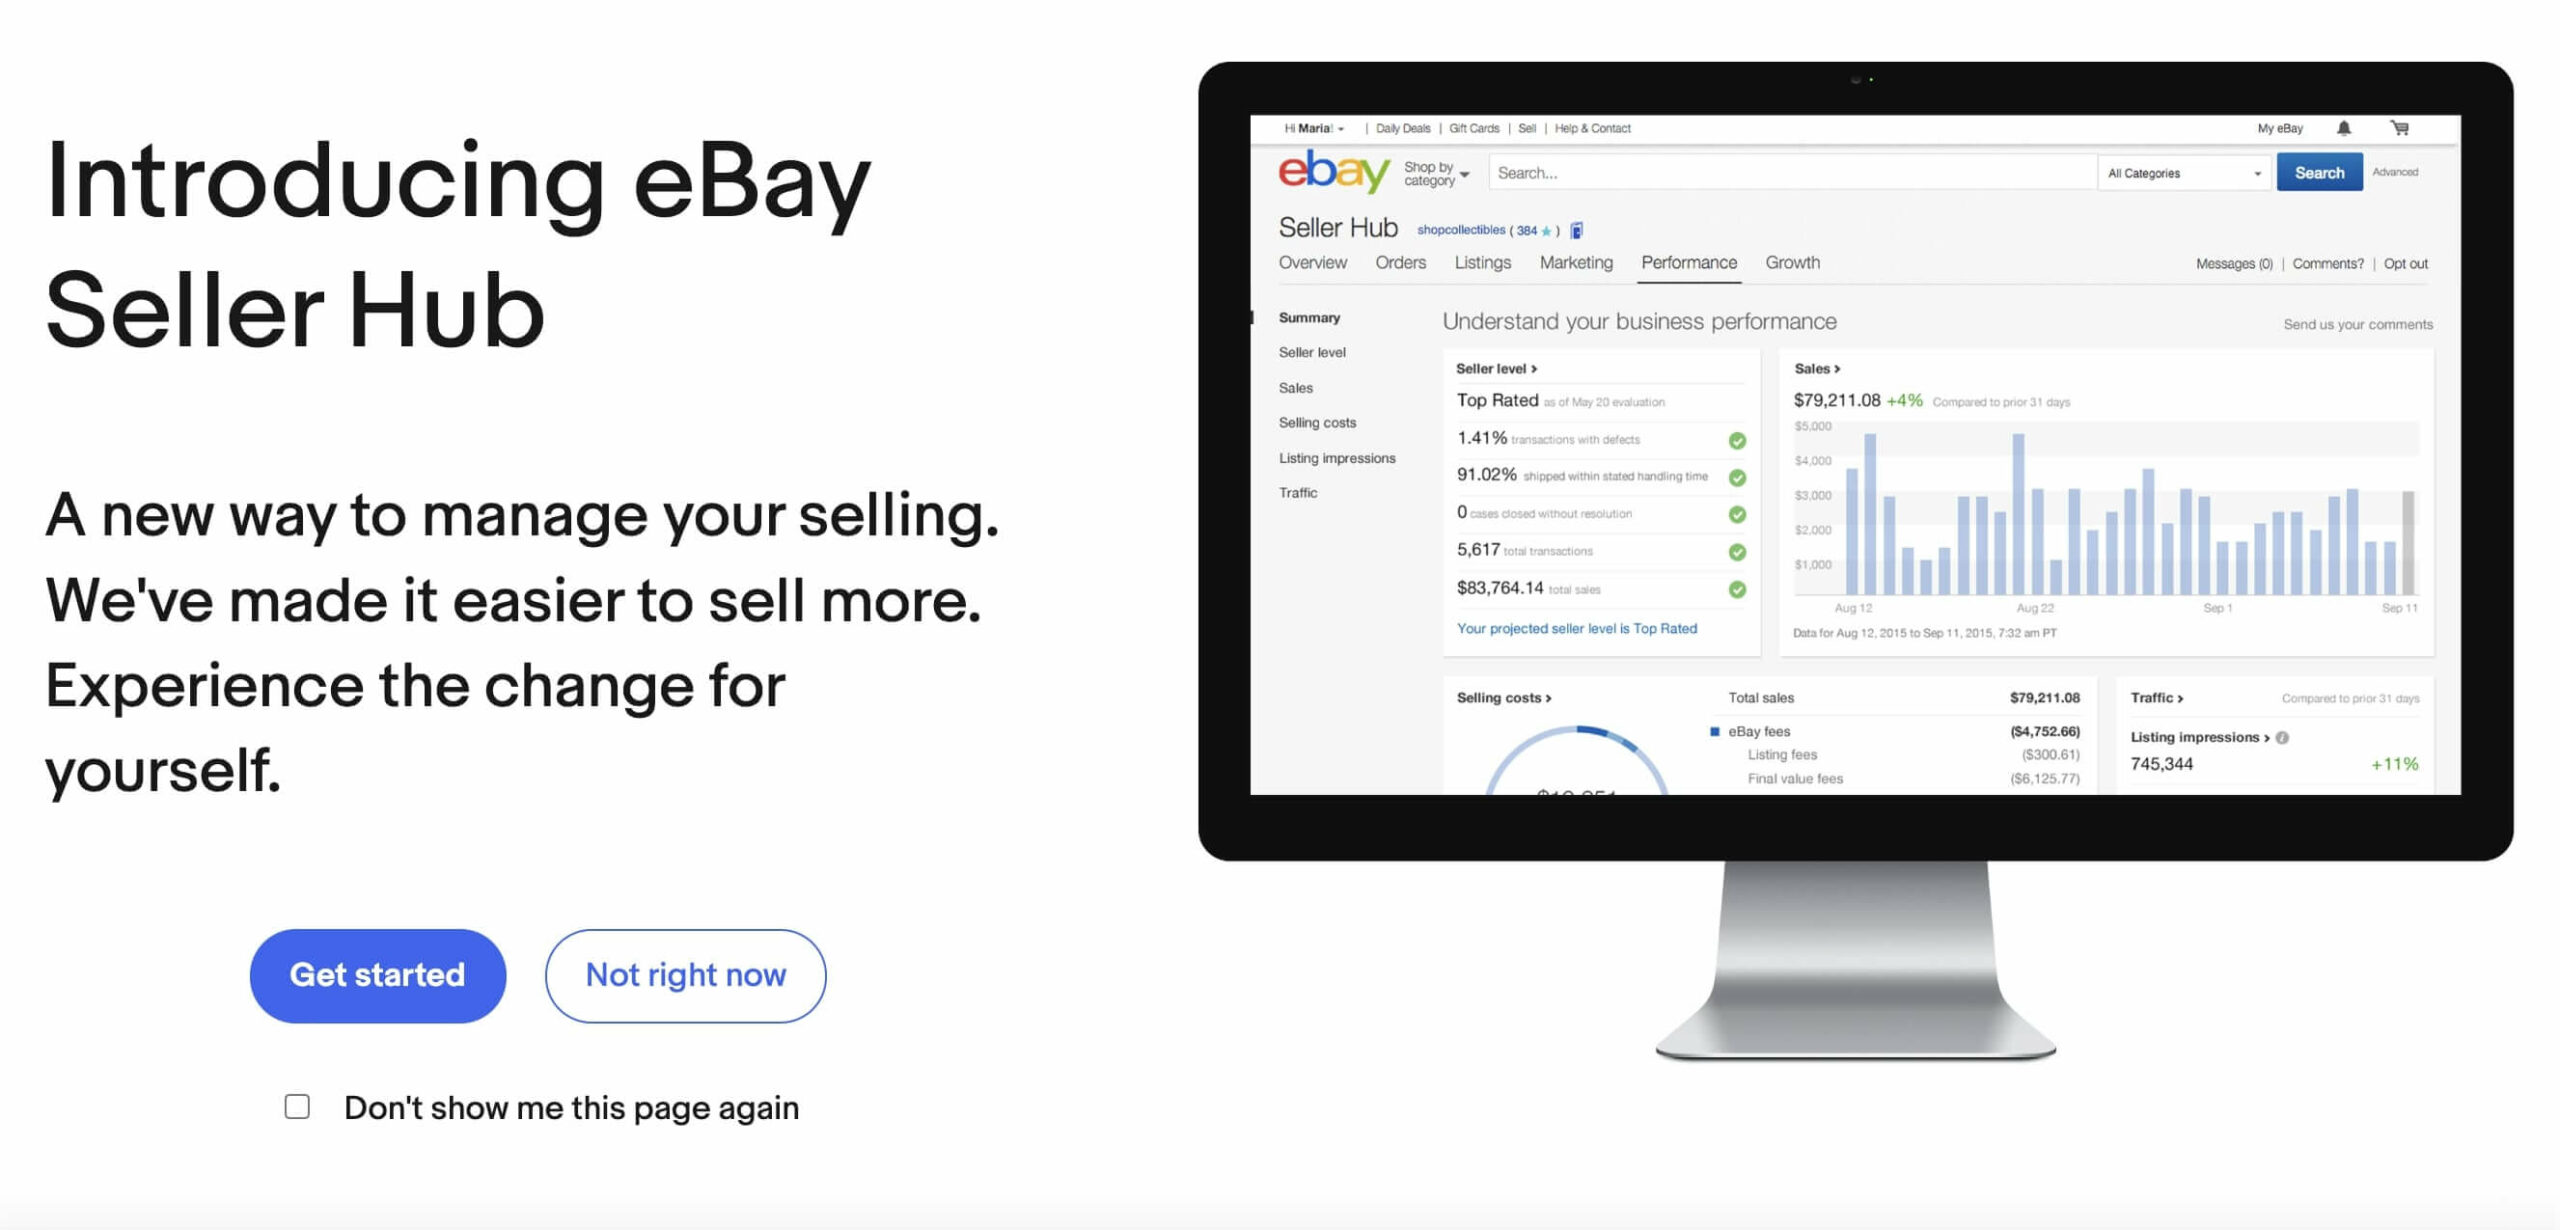 An eBay advertising page showcasing the eBay Seller Hub. There is a small explanation besides the image of a computer monitor with the Seller Hub on the screen, highlighting graphics and numbers in blue and green.